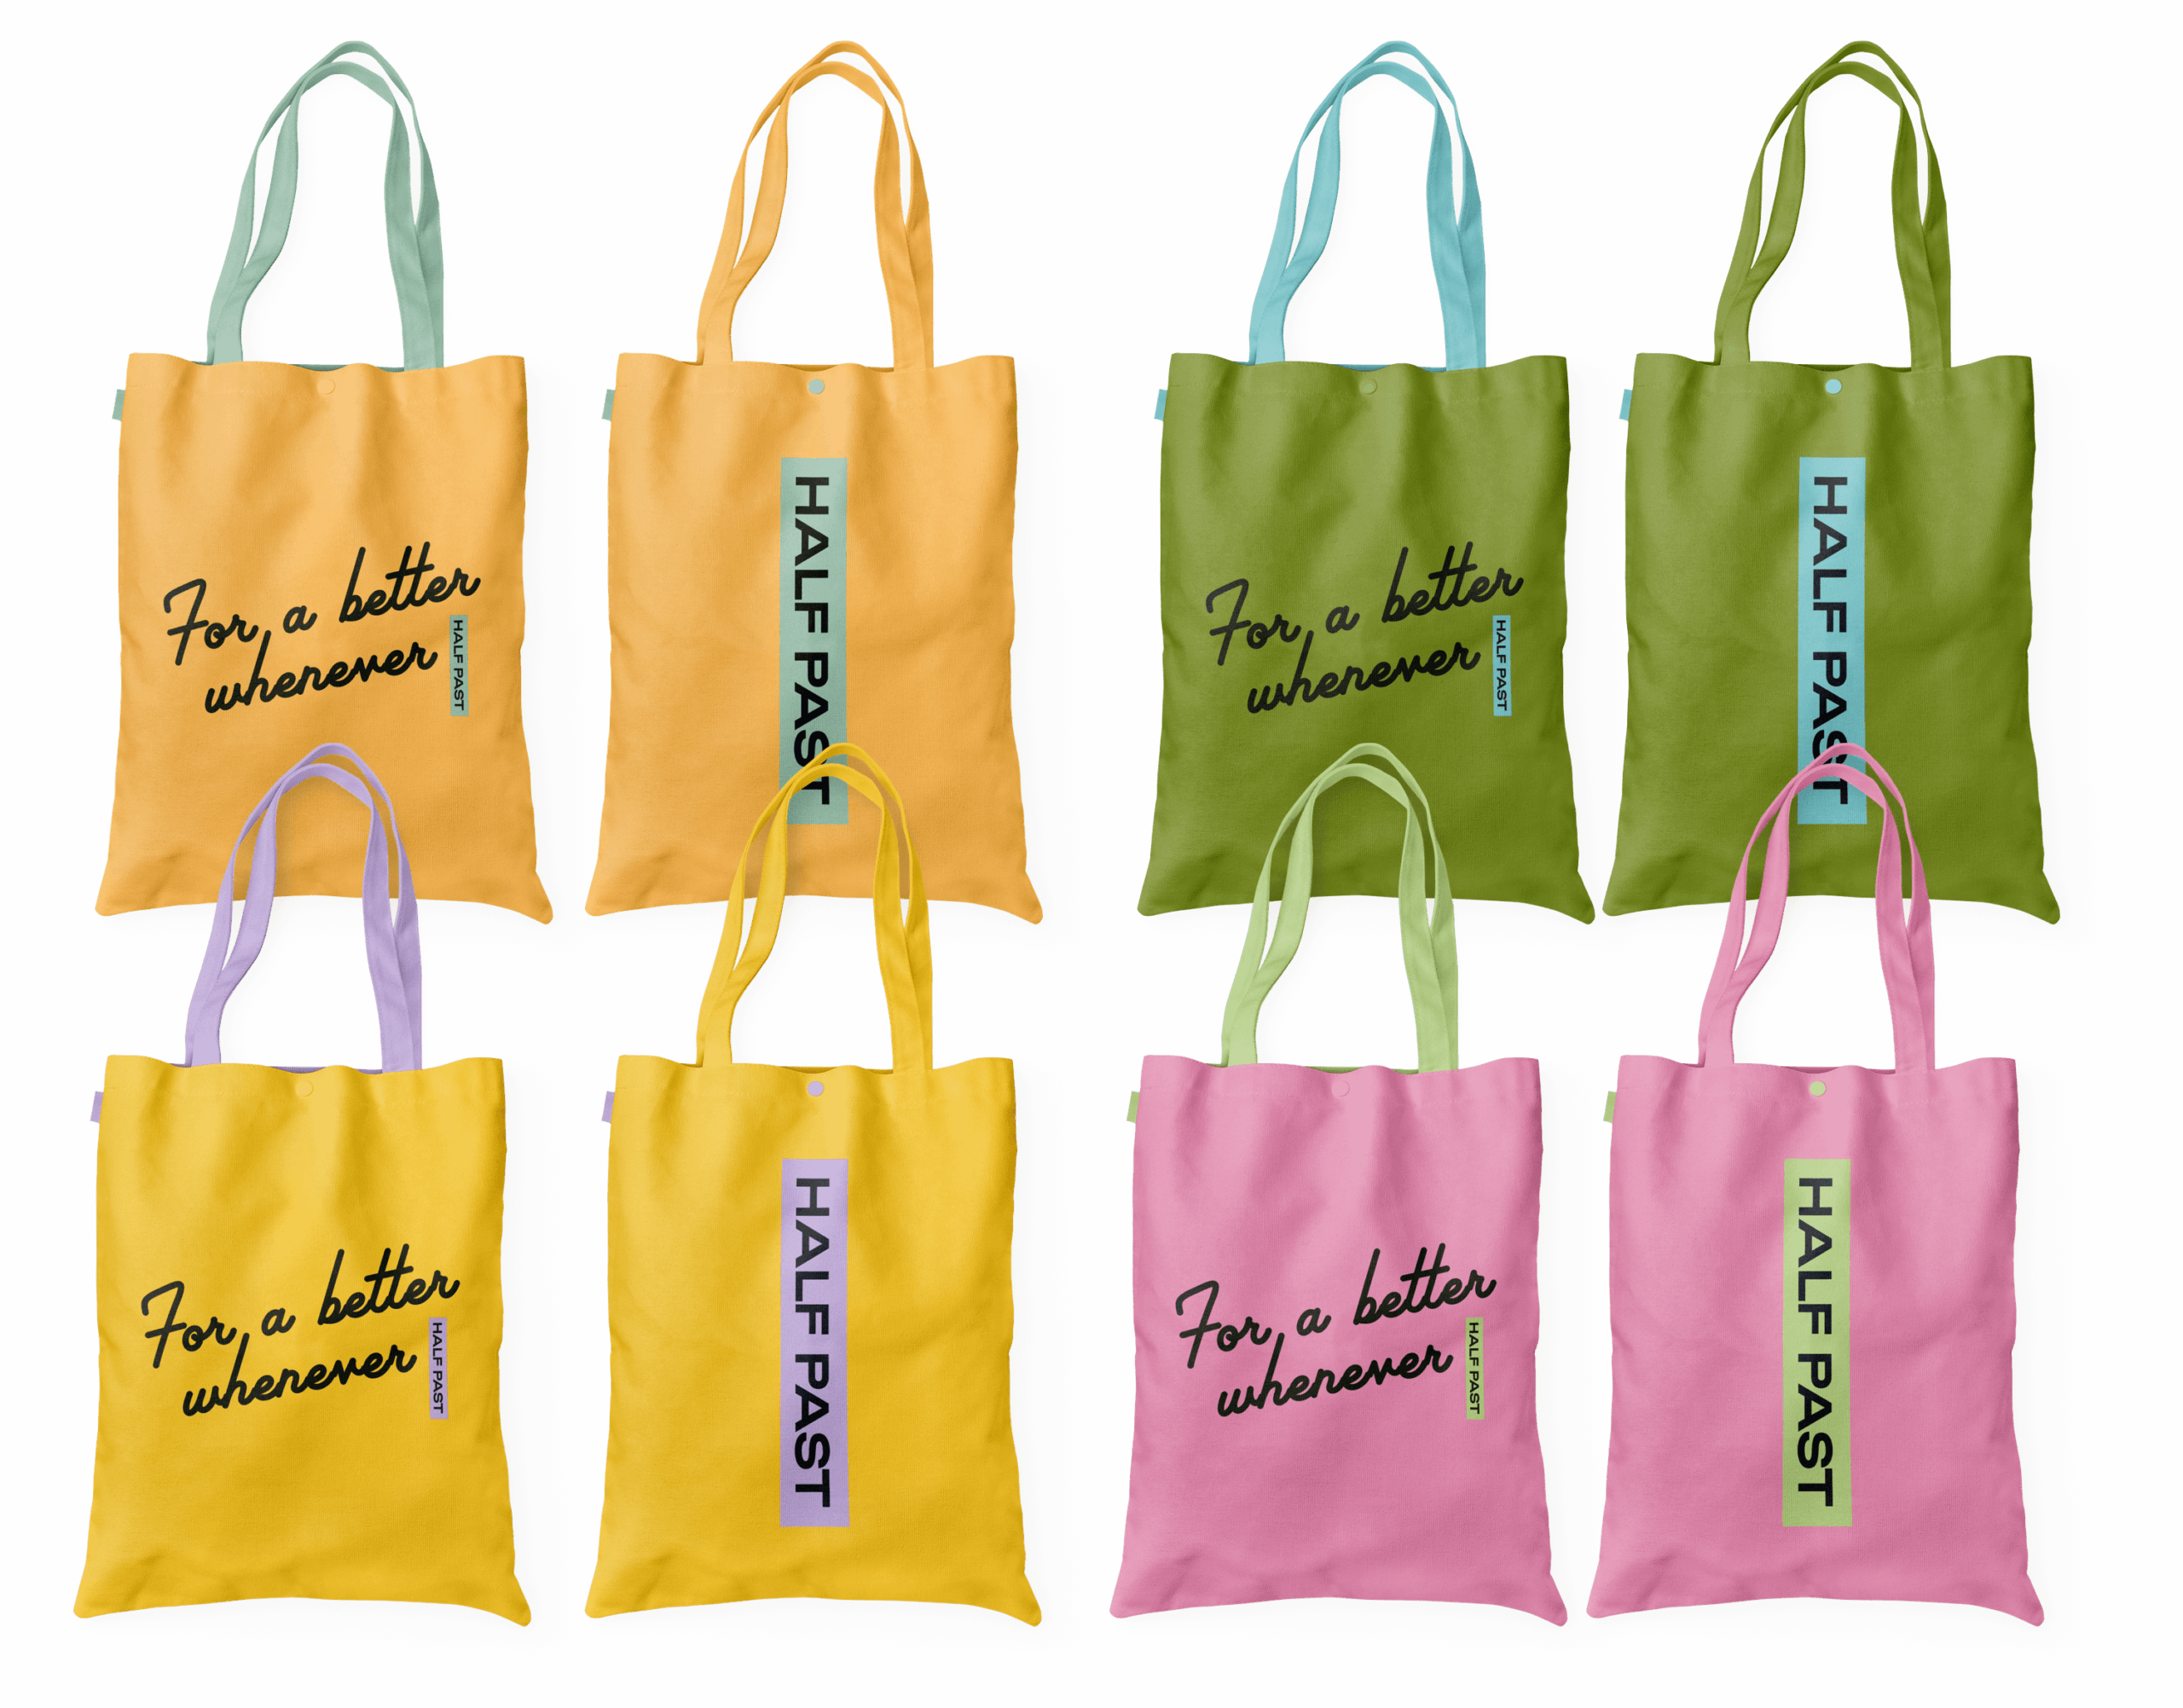 Four Tote Bag Merchandise Design Mockups with Each Tote Featuring One of The Four Half Past Hard Seltzer Flavors